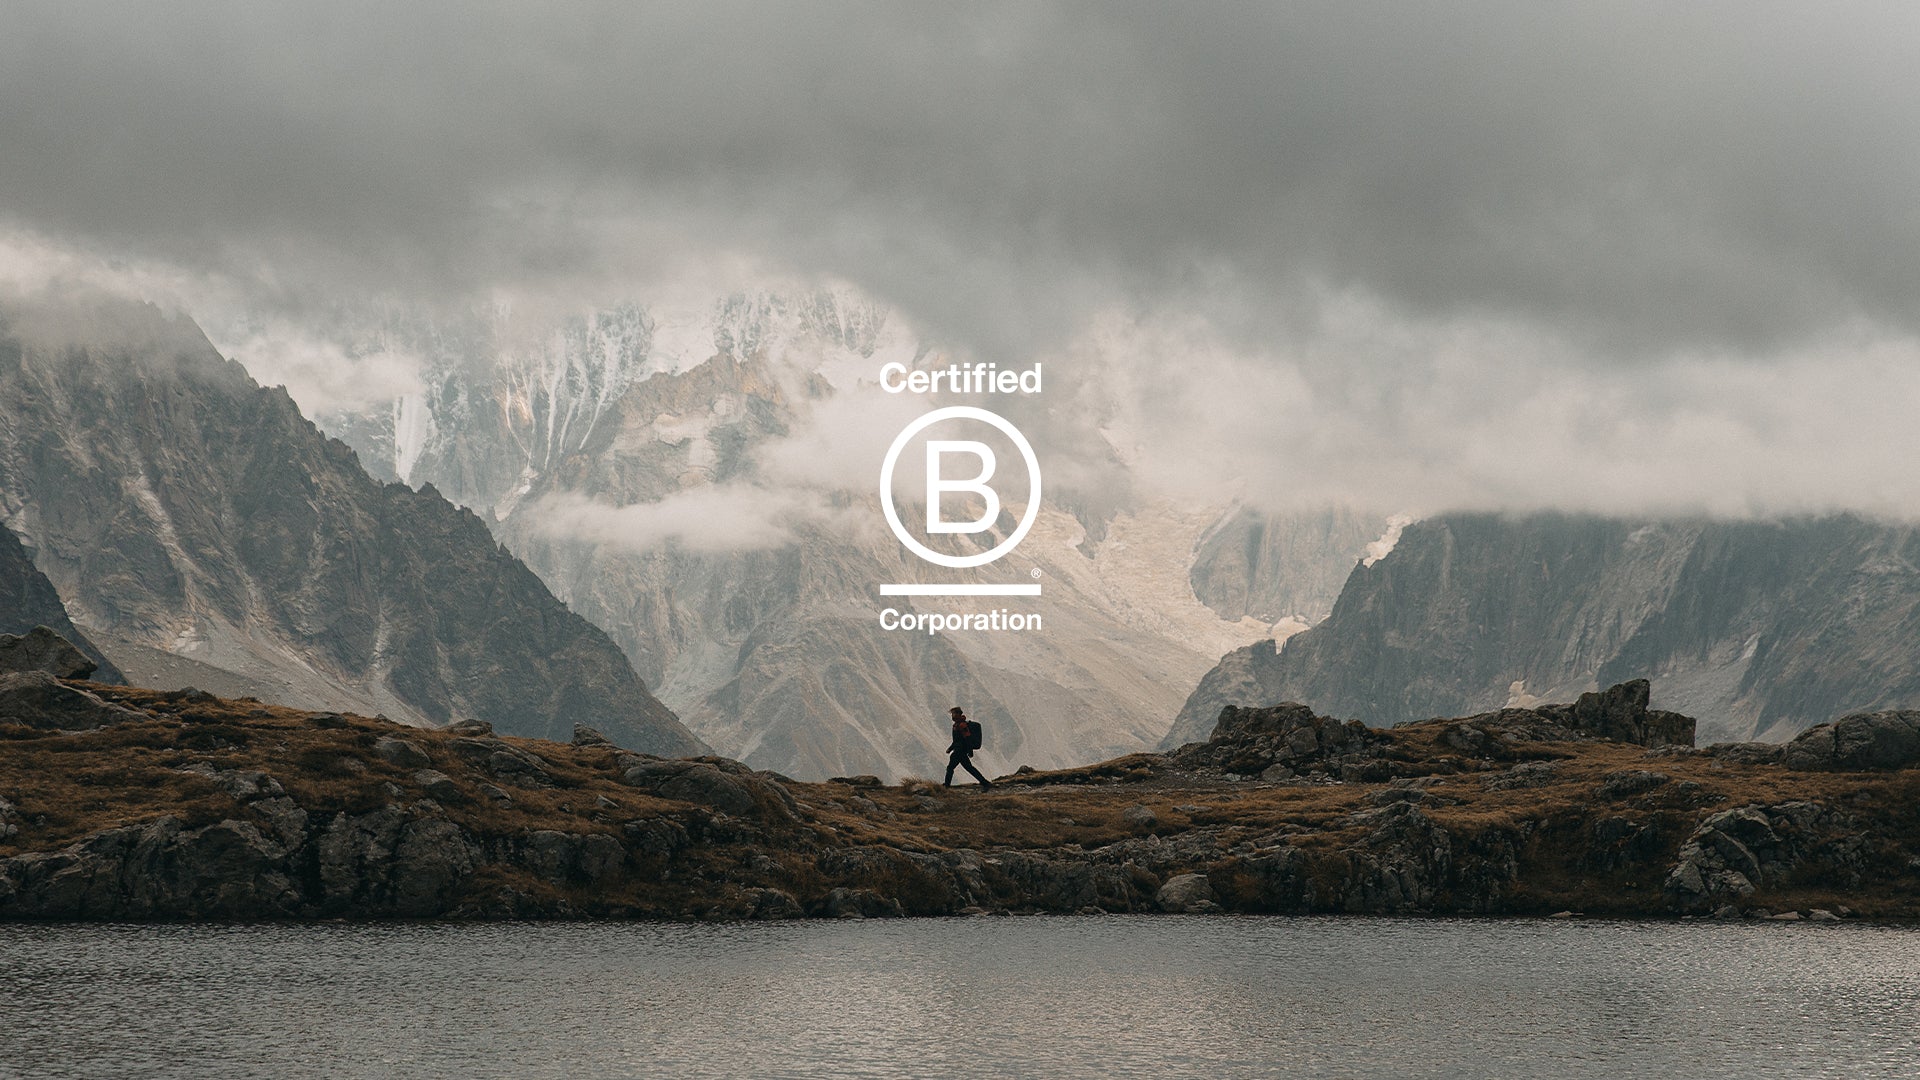 A photo of a man walking in front of a mountain range with the B Corporation logo in the middle of the image